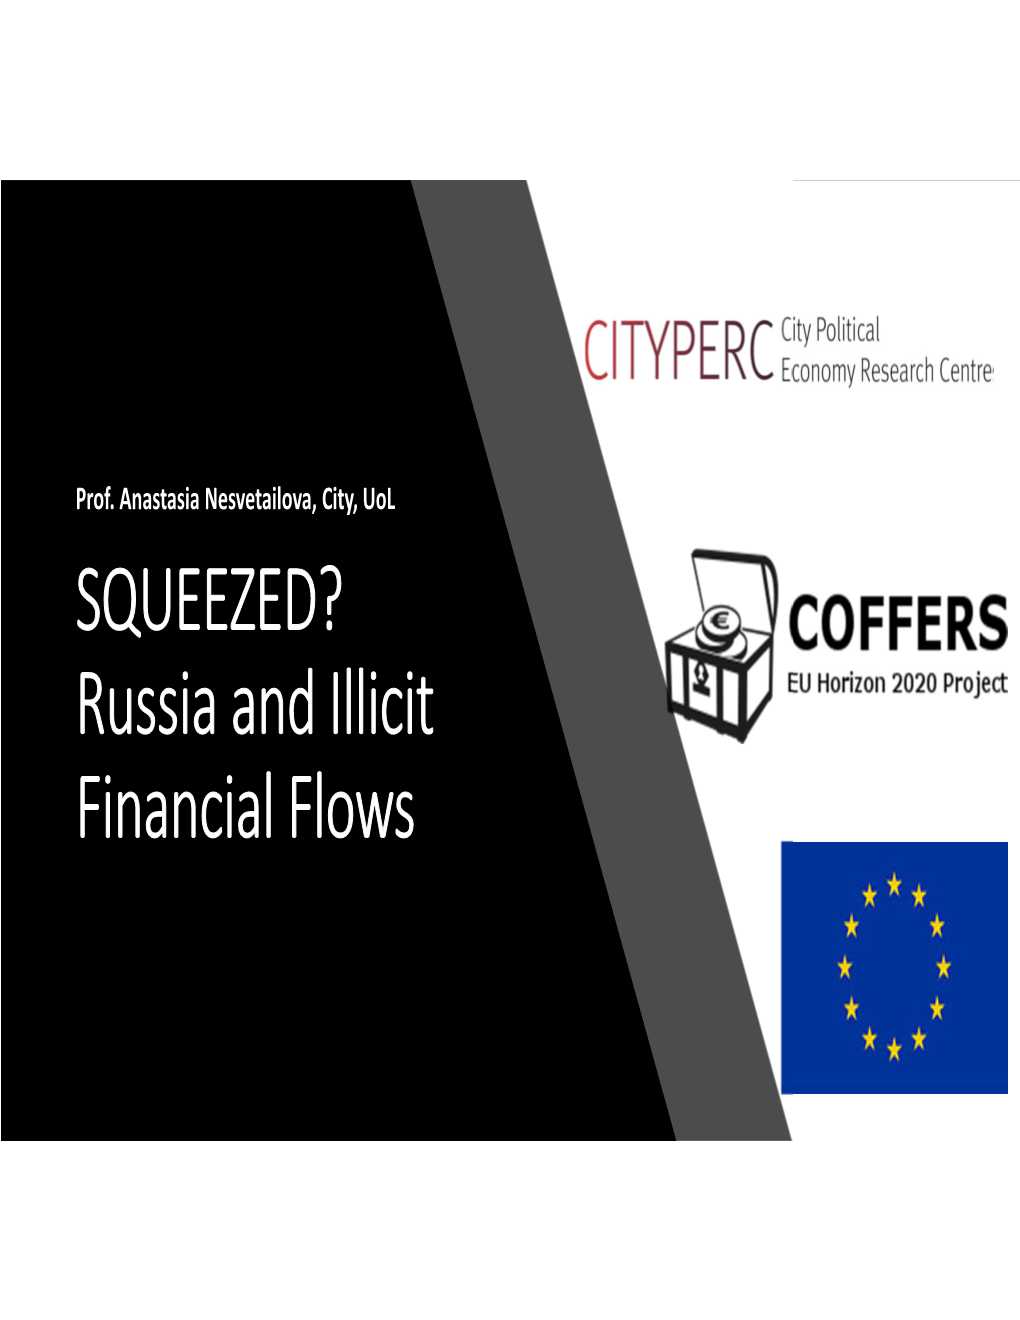 Russia and Illicit Financial Flows